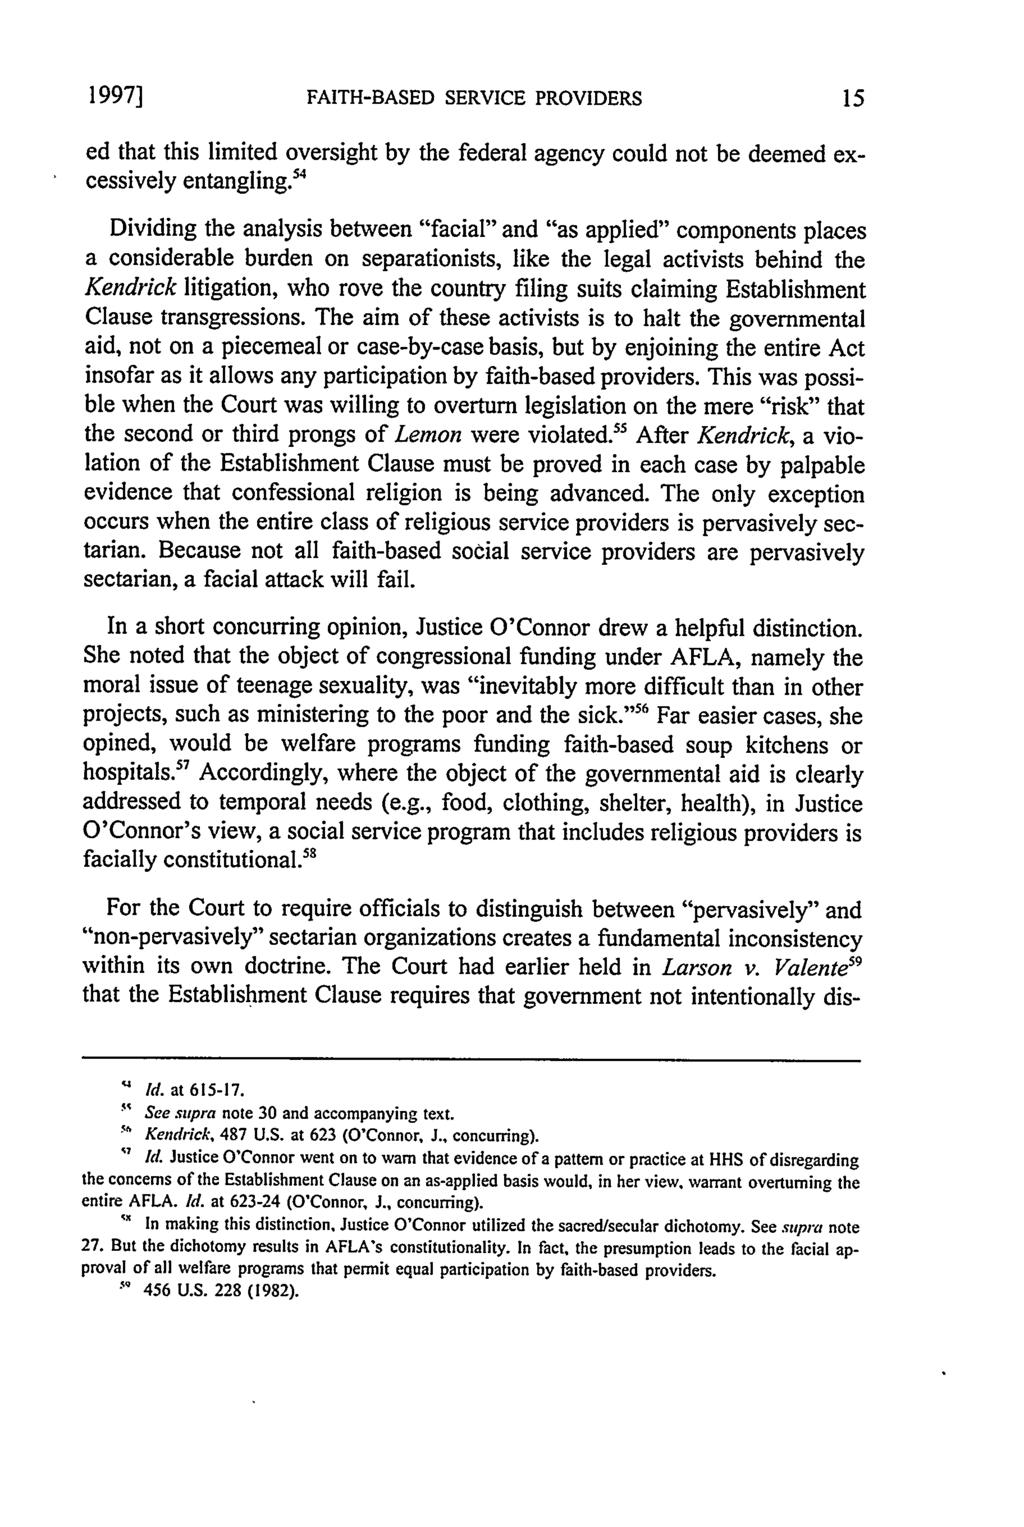 1997] FAITH-BASED SERVICE PROVIDERS ed that this limited oversight by the federal agency could not be deemed excessively entangling.